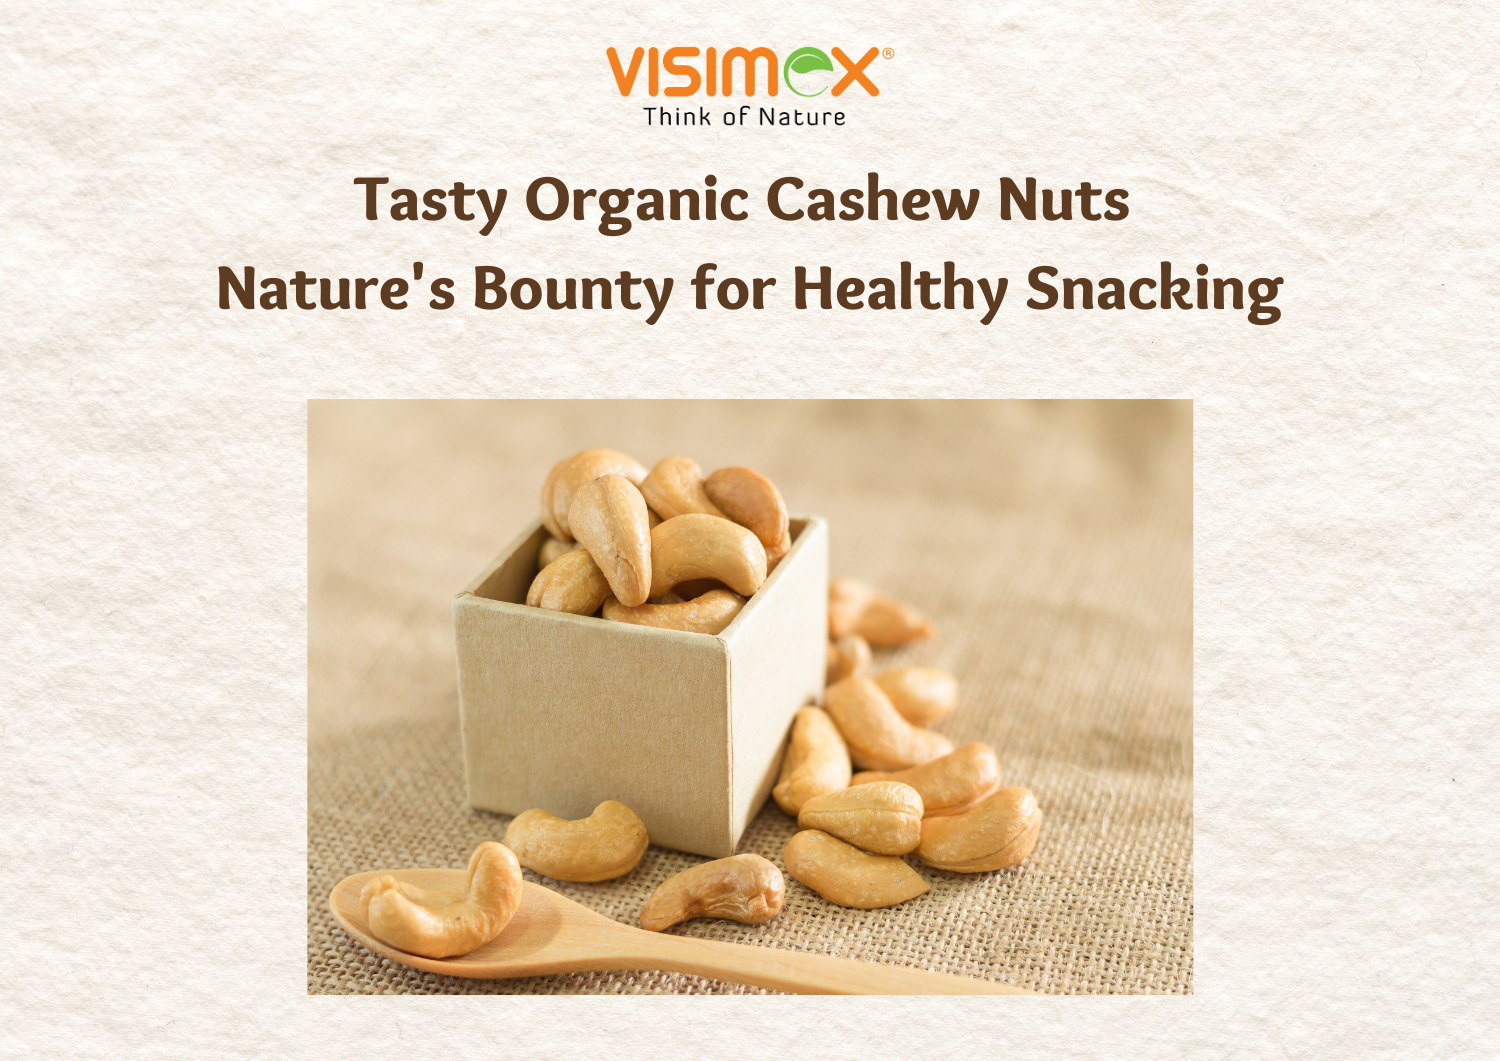 Tasty Organic Cashew Nuts: Nature's Bounty for Healthy Snacking